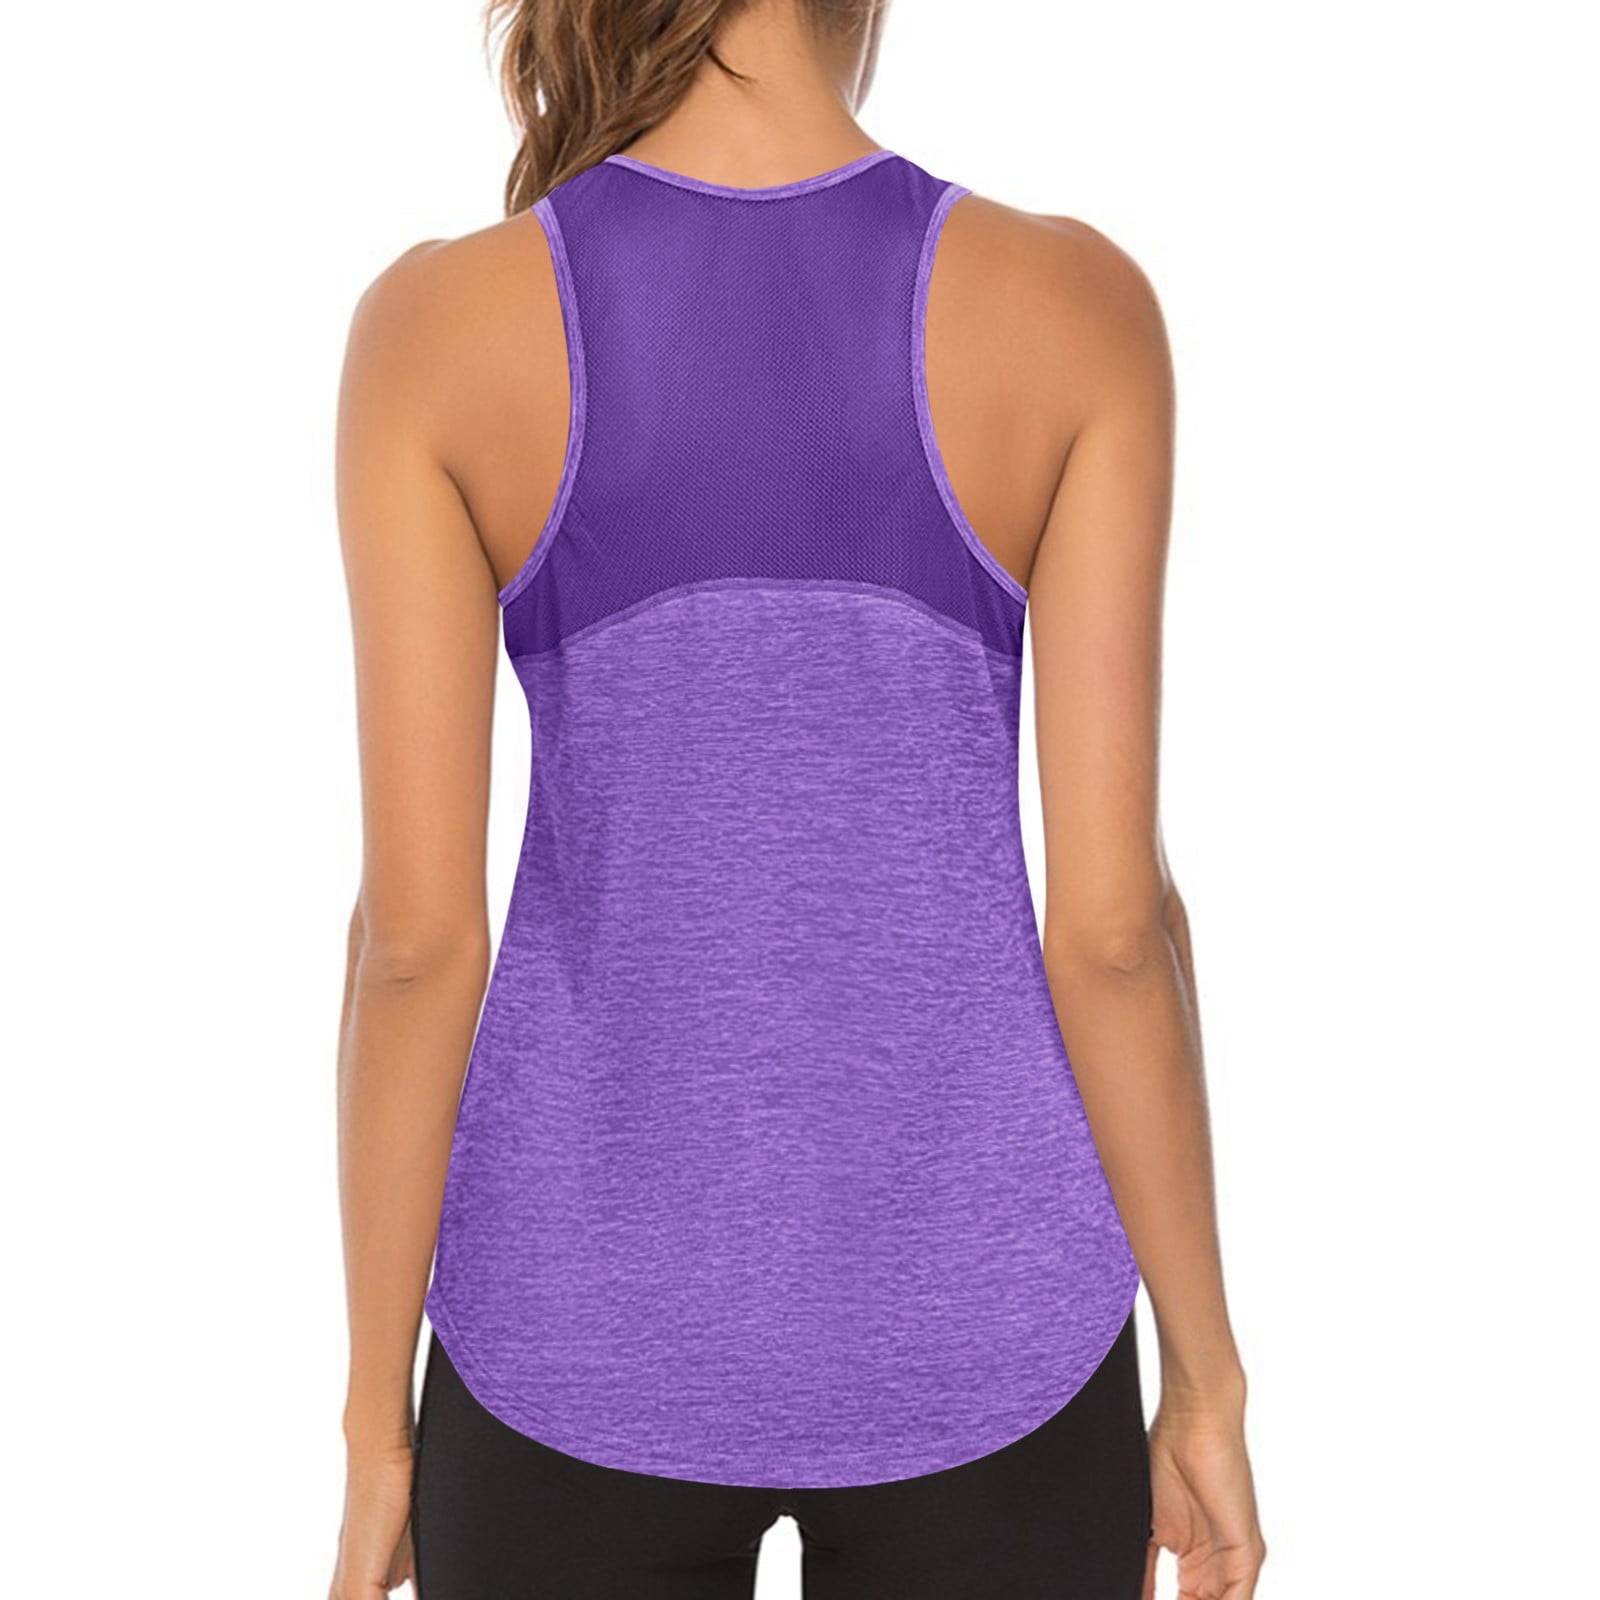 Women's Tops Strappy Crisscross Adjustable Wirefree Padded Yoga Tank ...